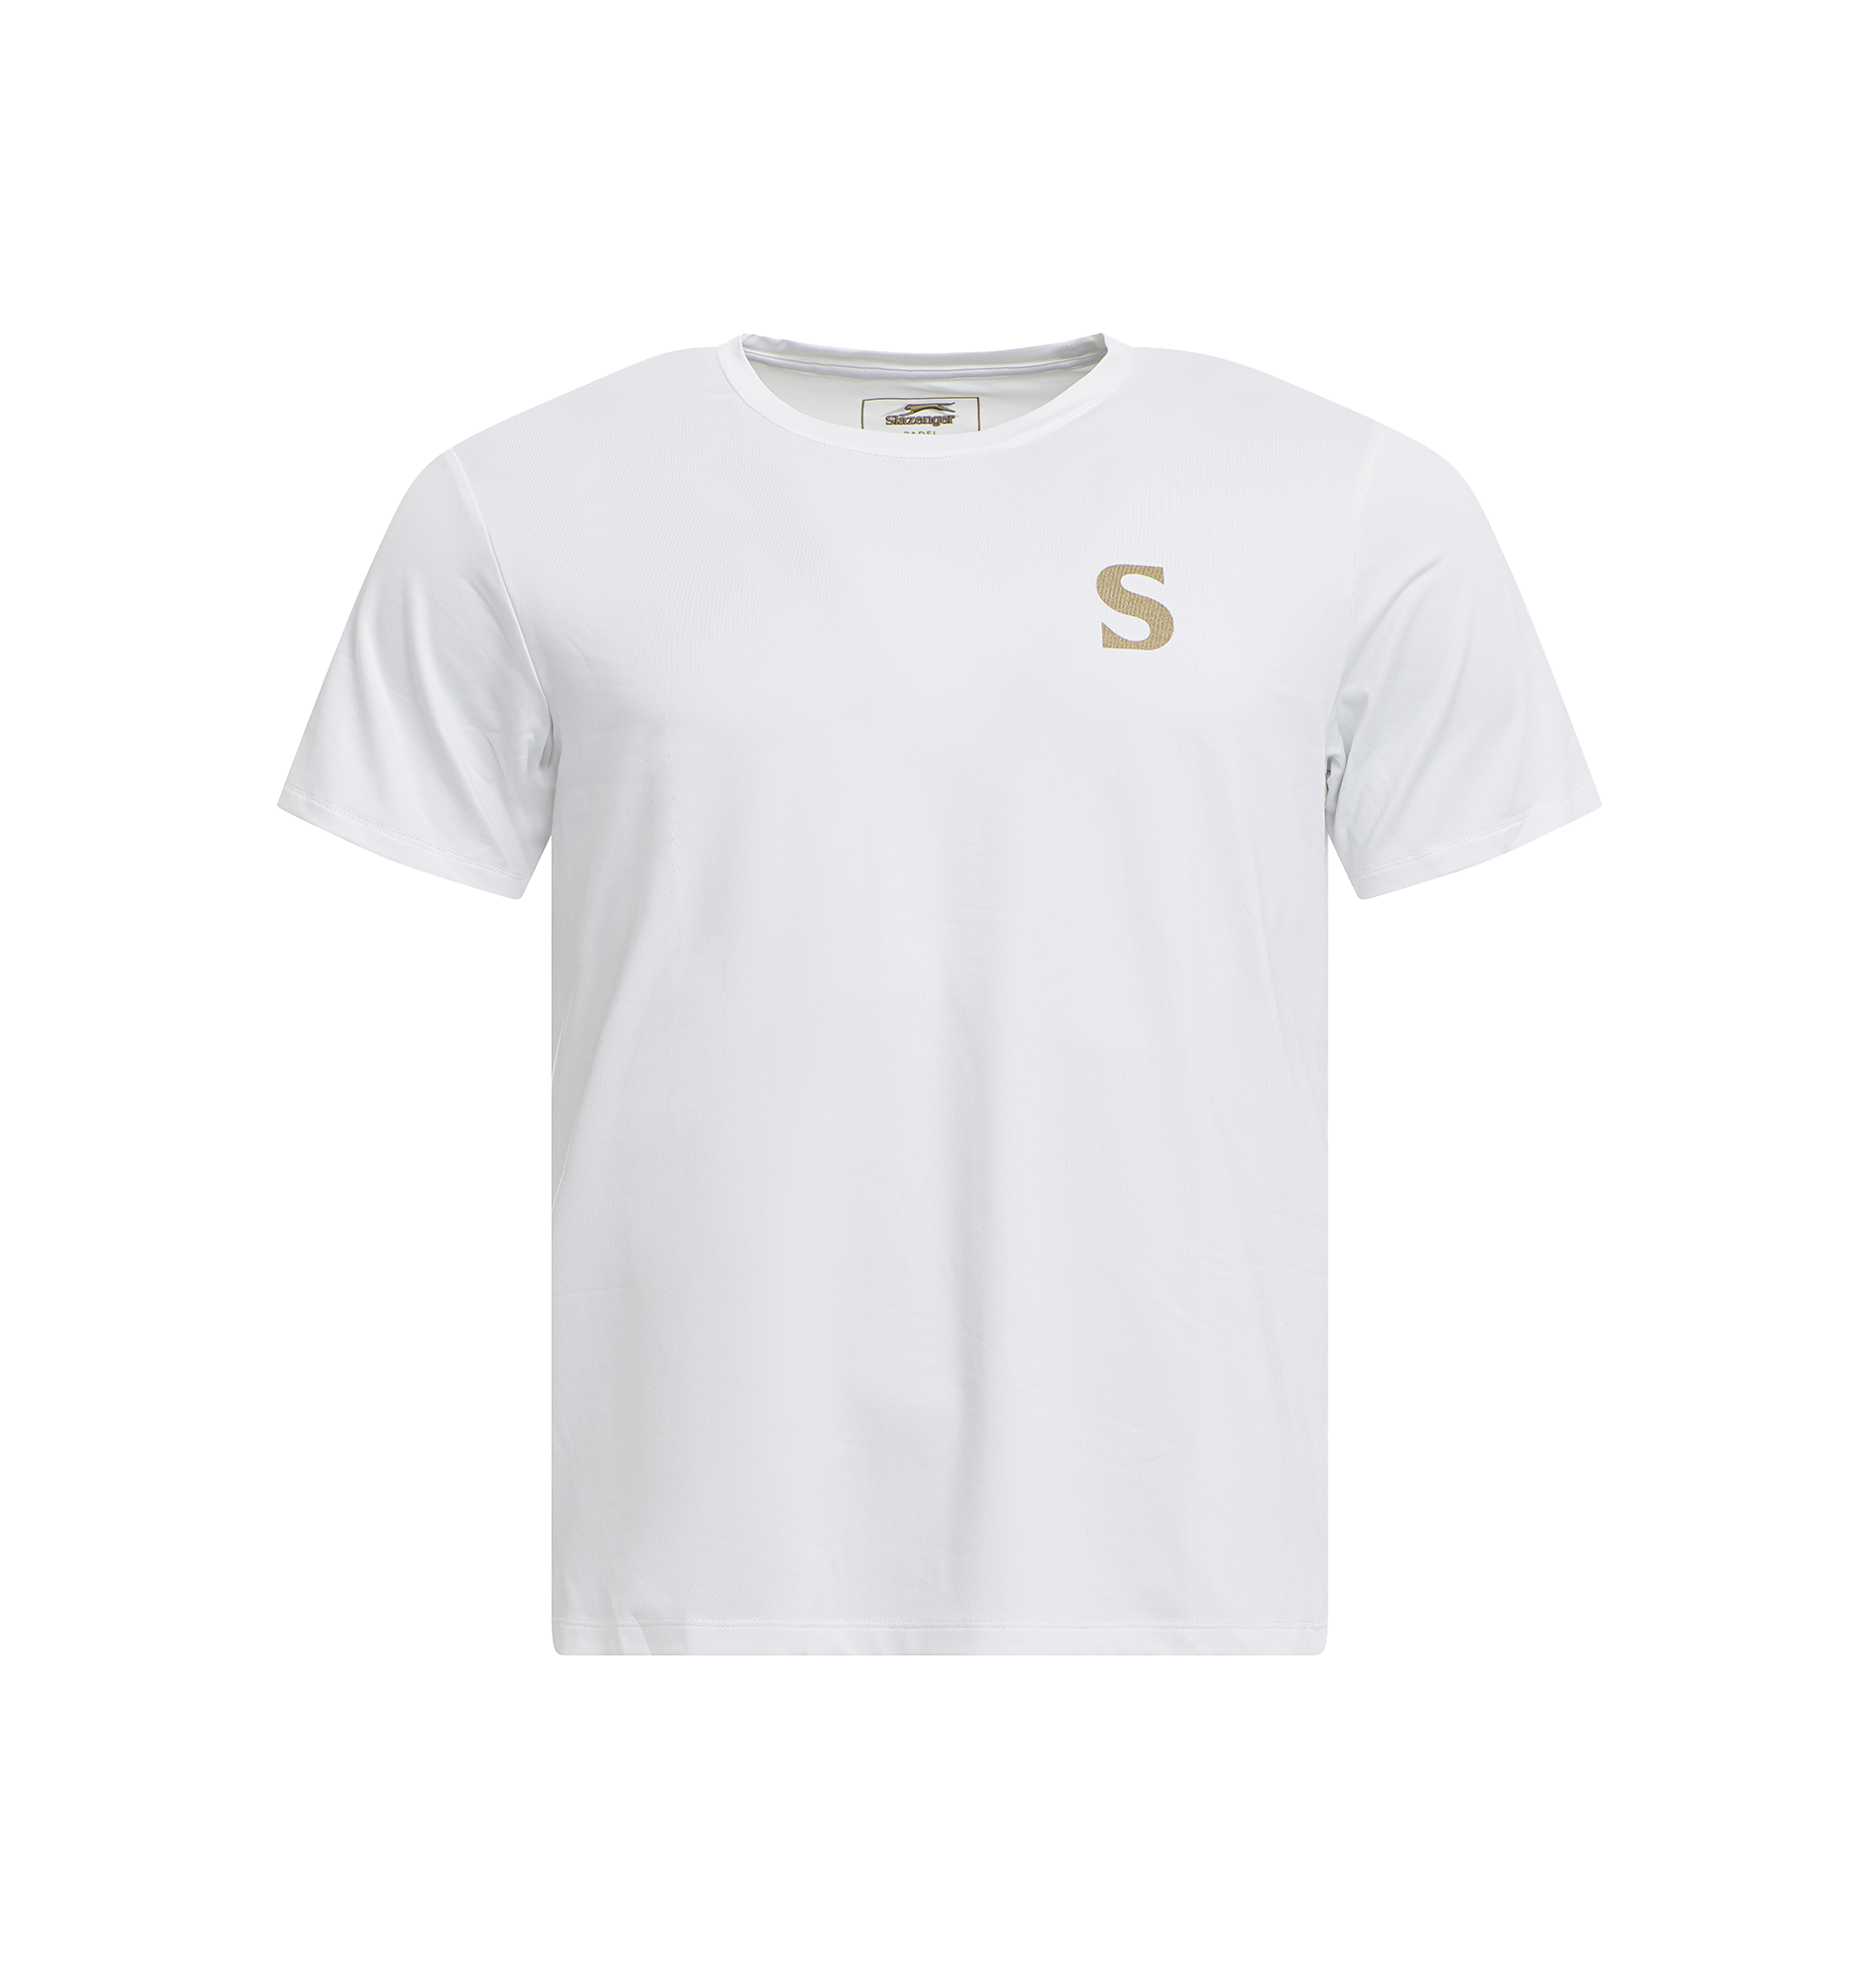 THE S TEE EMERSON WHITE